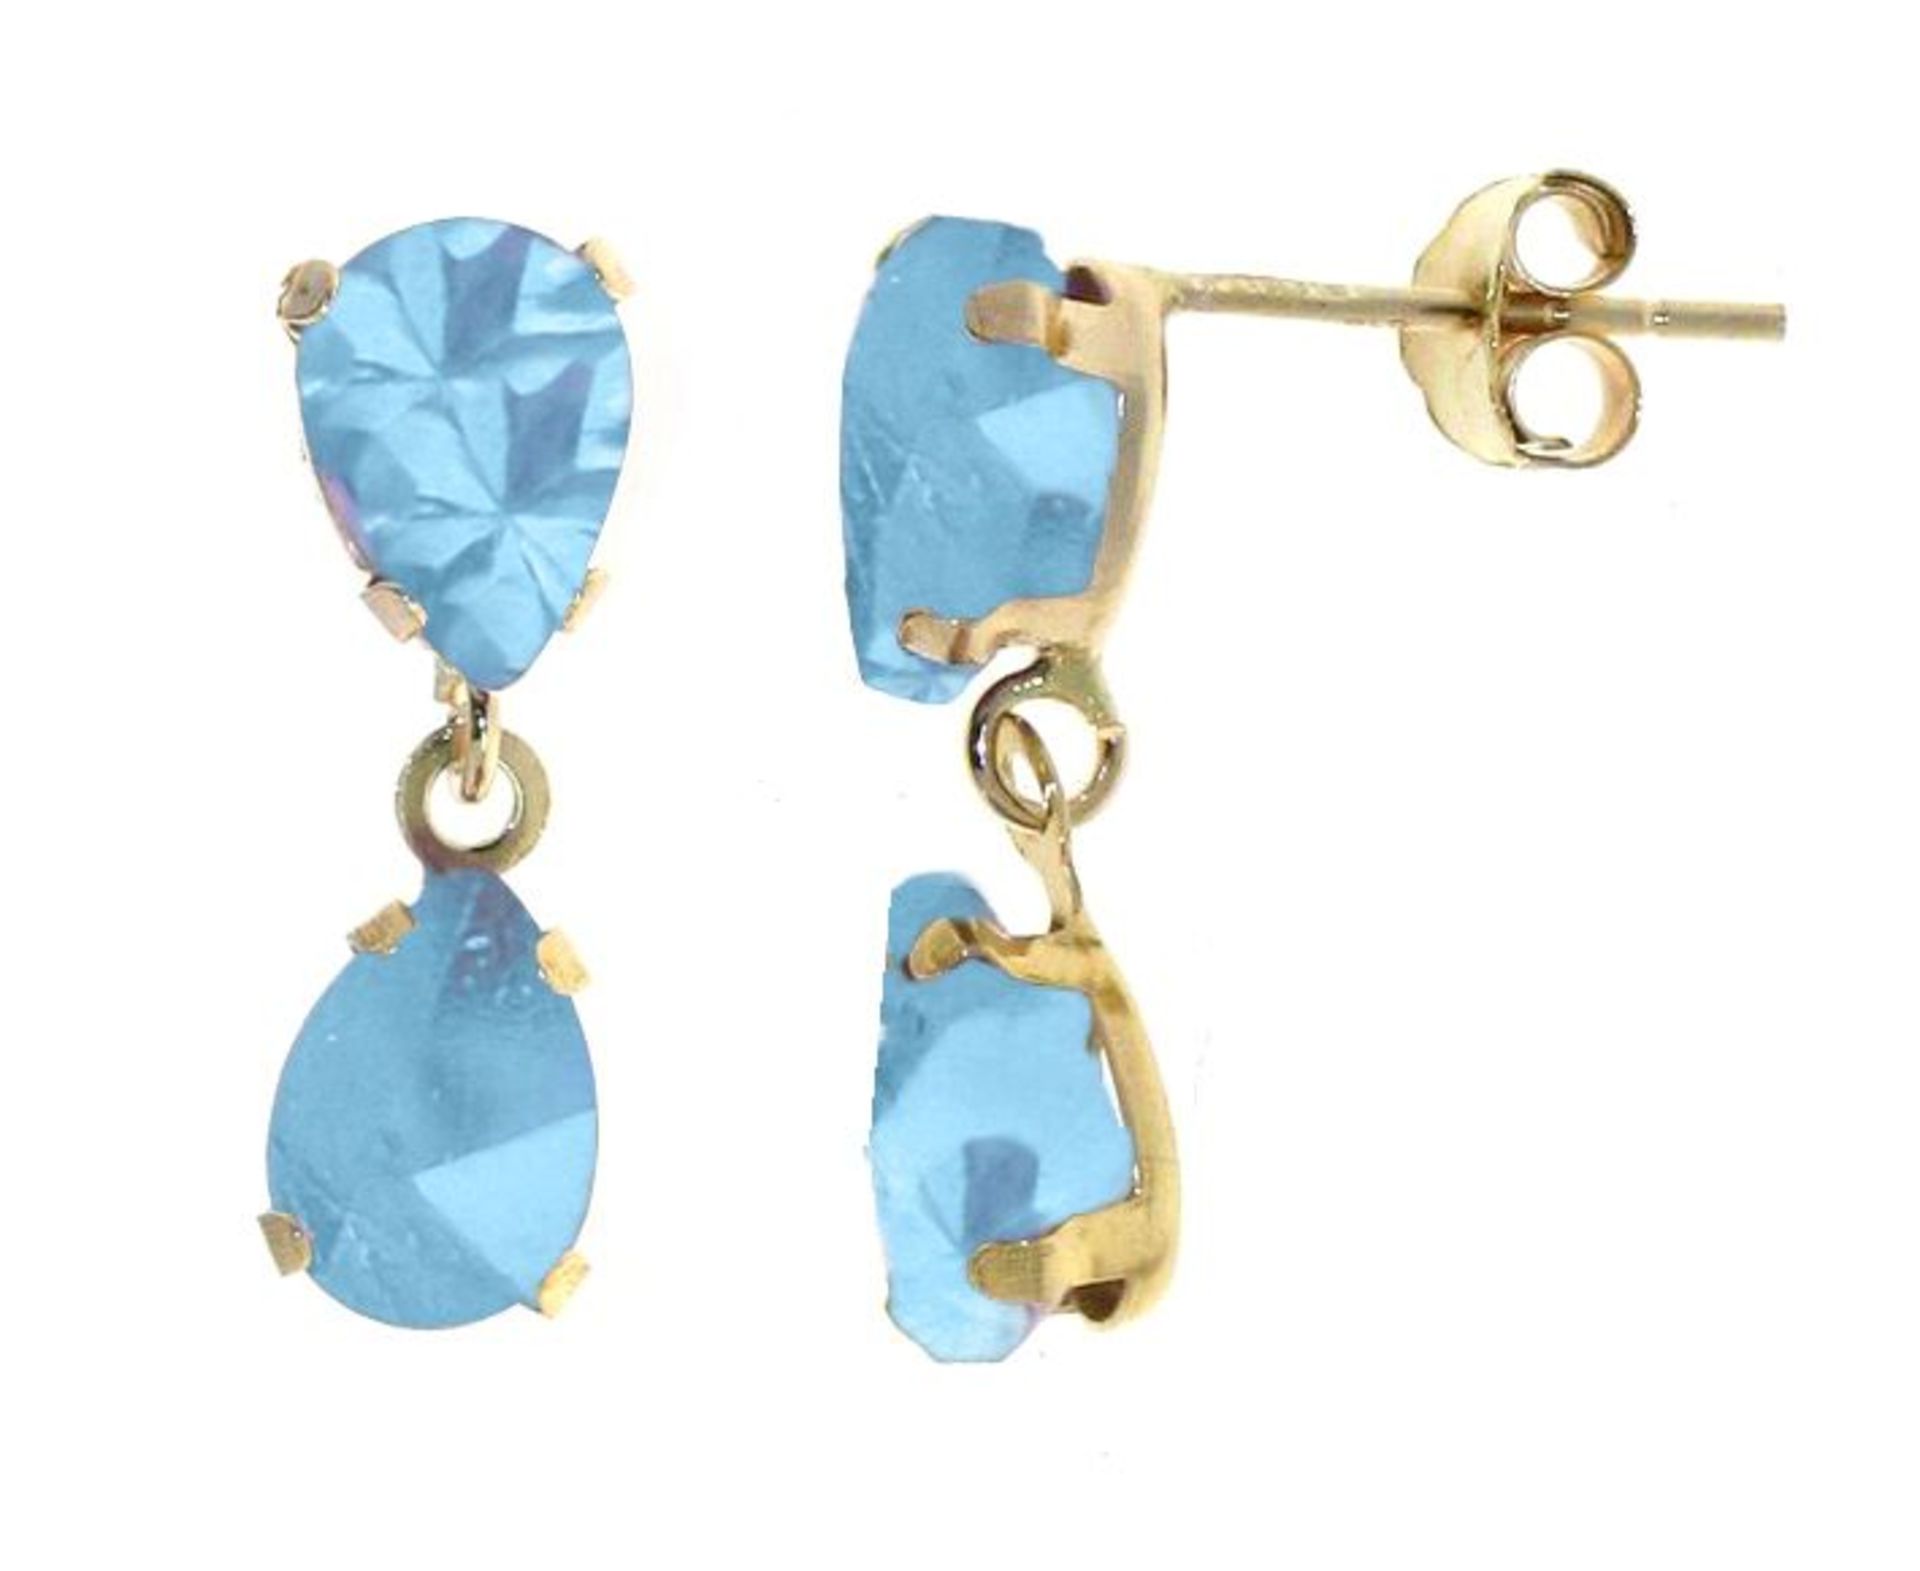 Blue Topaz Natural Gemstone Two Stone Stud Earrings, Metal 9ct Yellow Gold, Weight (g) 0.8, RRP £